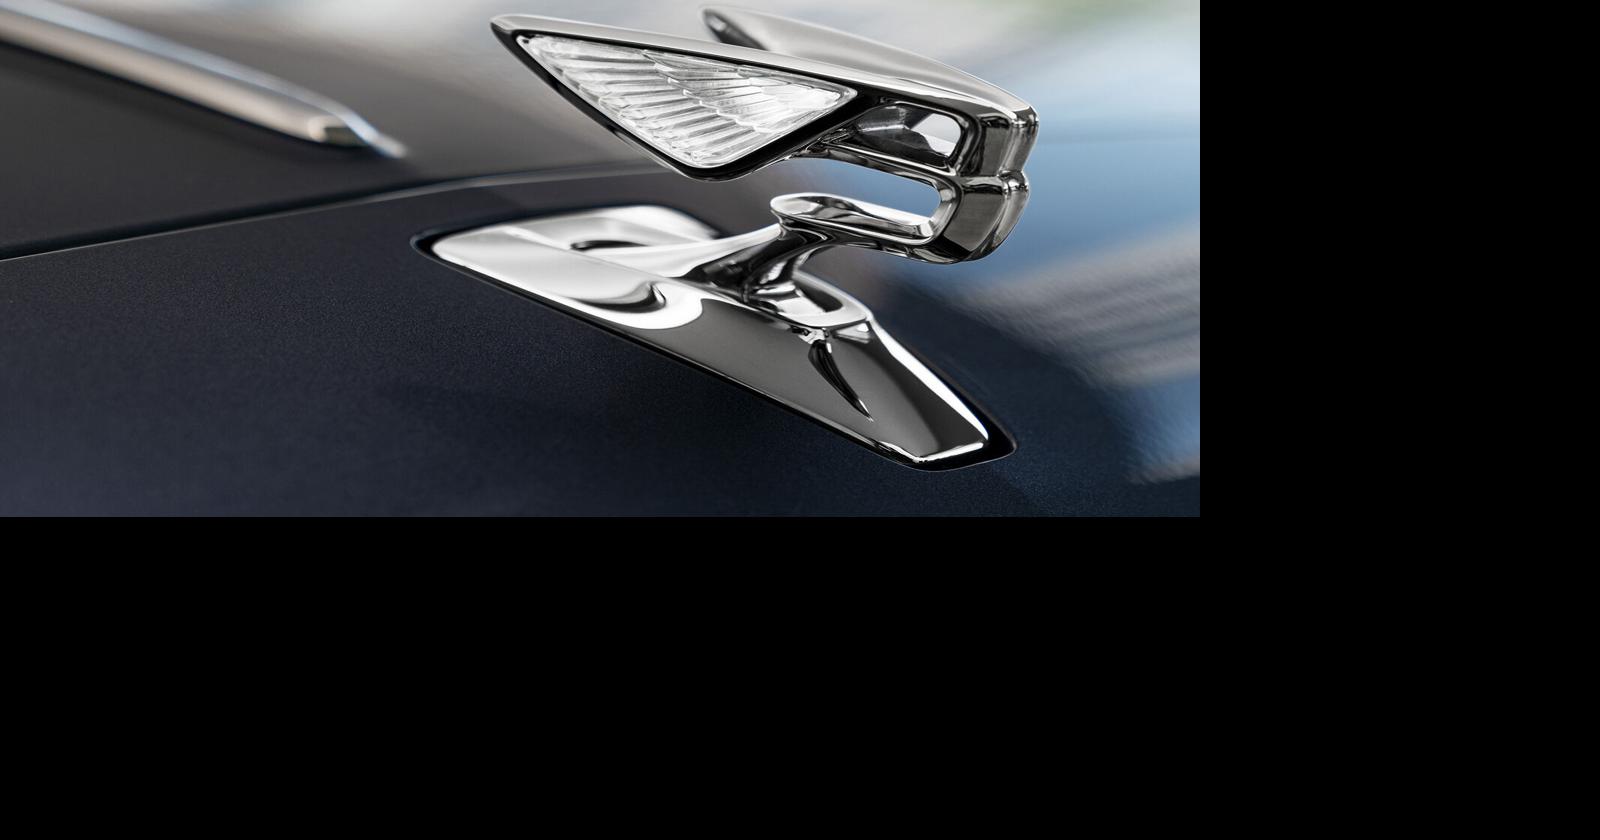 Putting focus on the ever-receding hood ornament, Auto Features